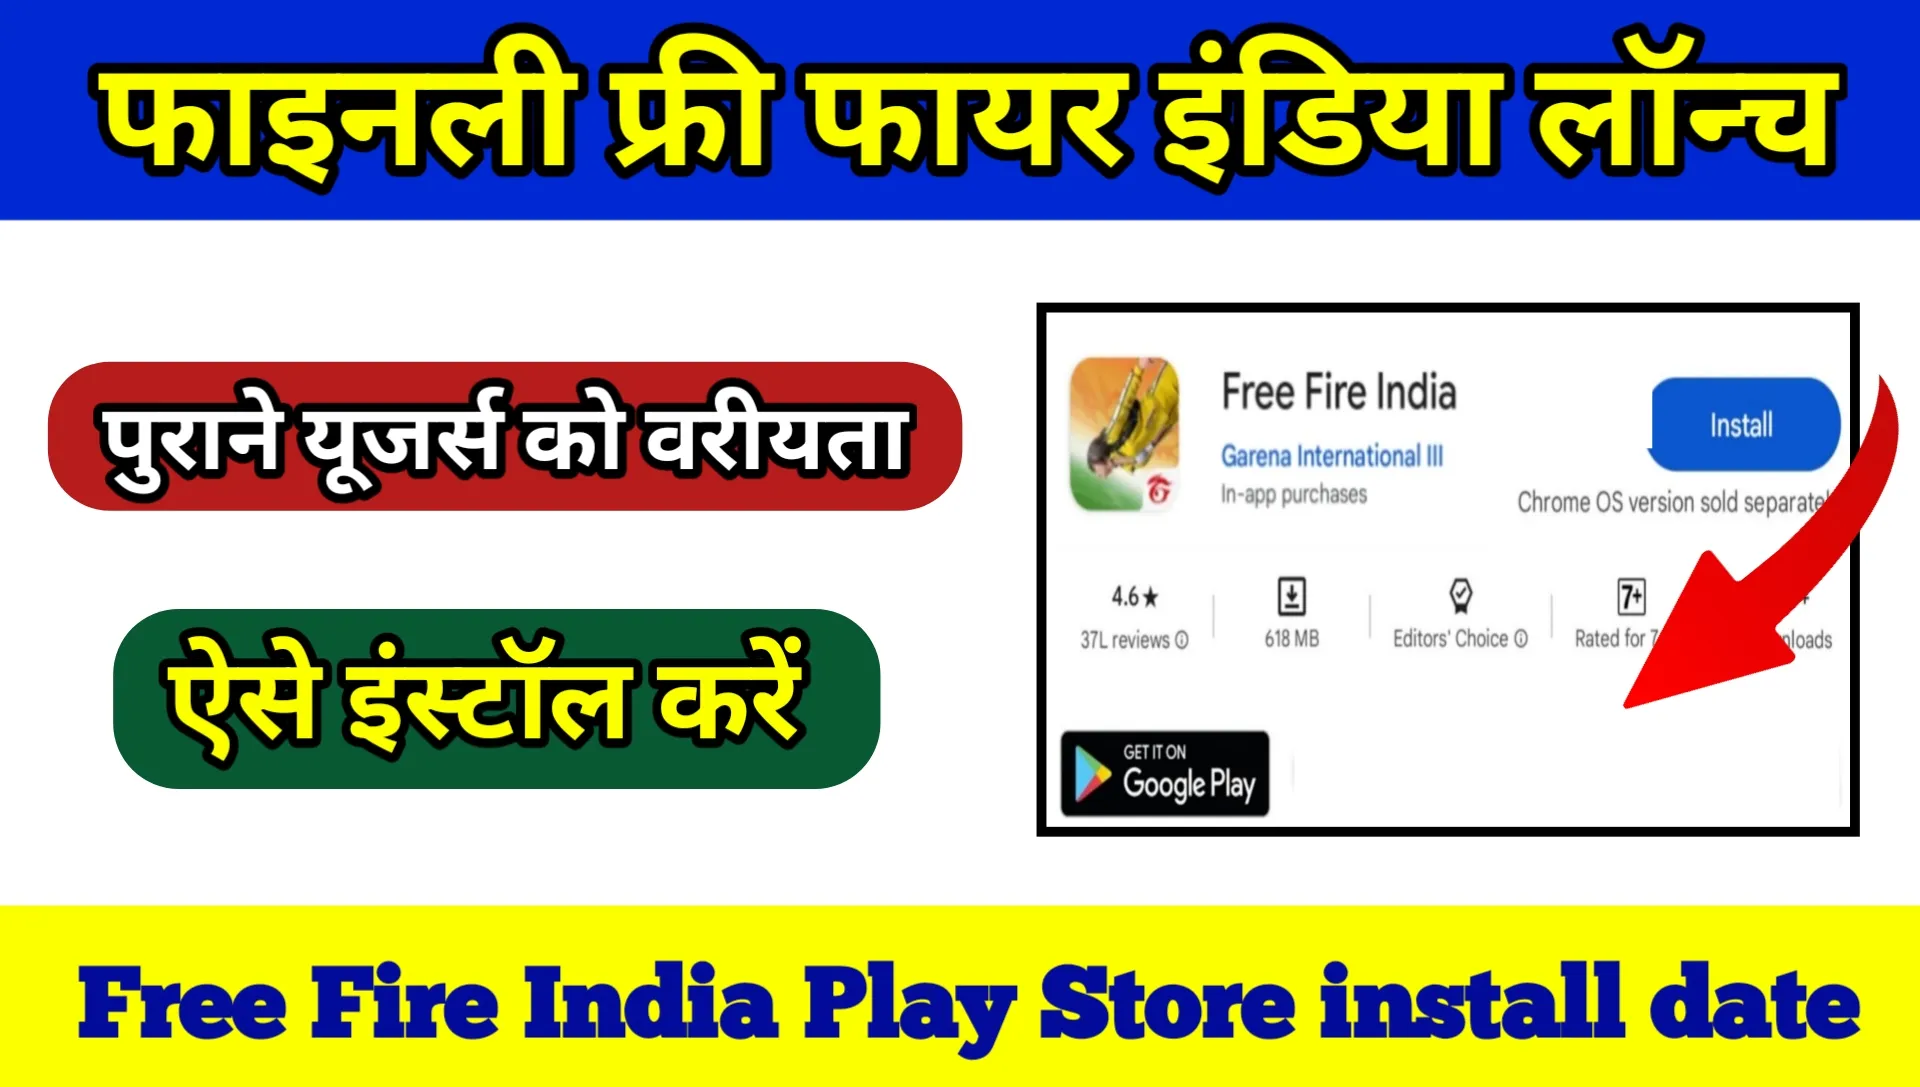 Free Fire India Play Store install date